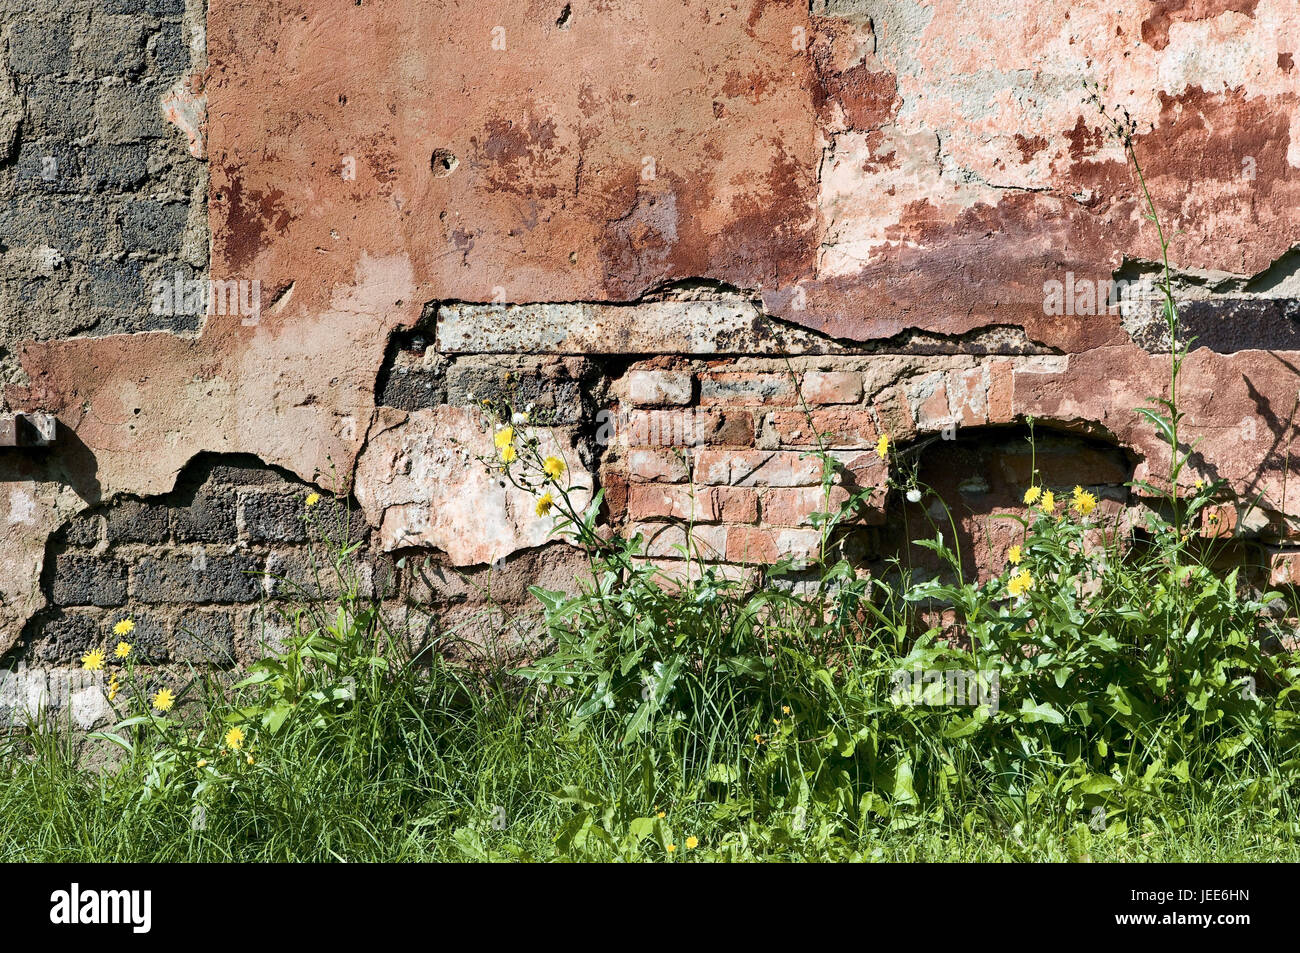 Grass, flowers, defensive wall, old, medium close-up, detail, Stock Photo